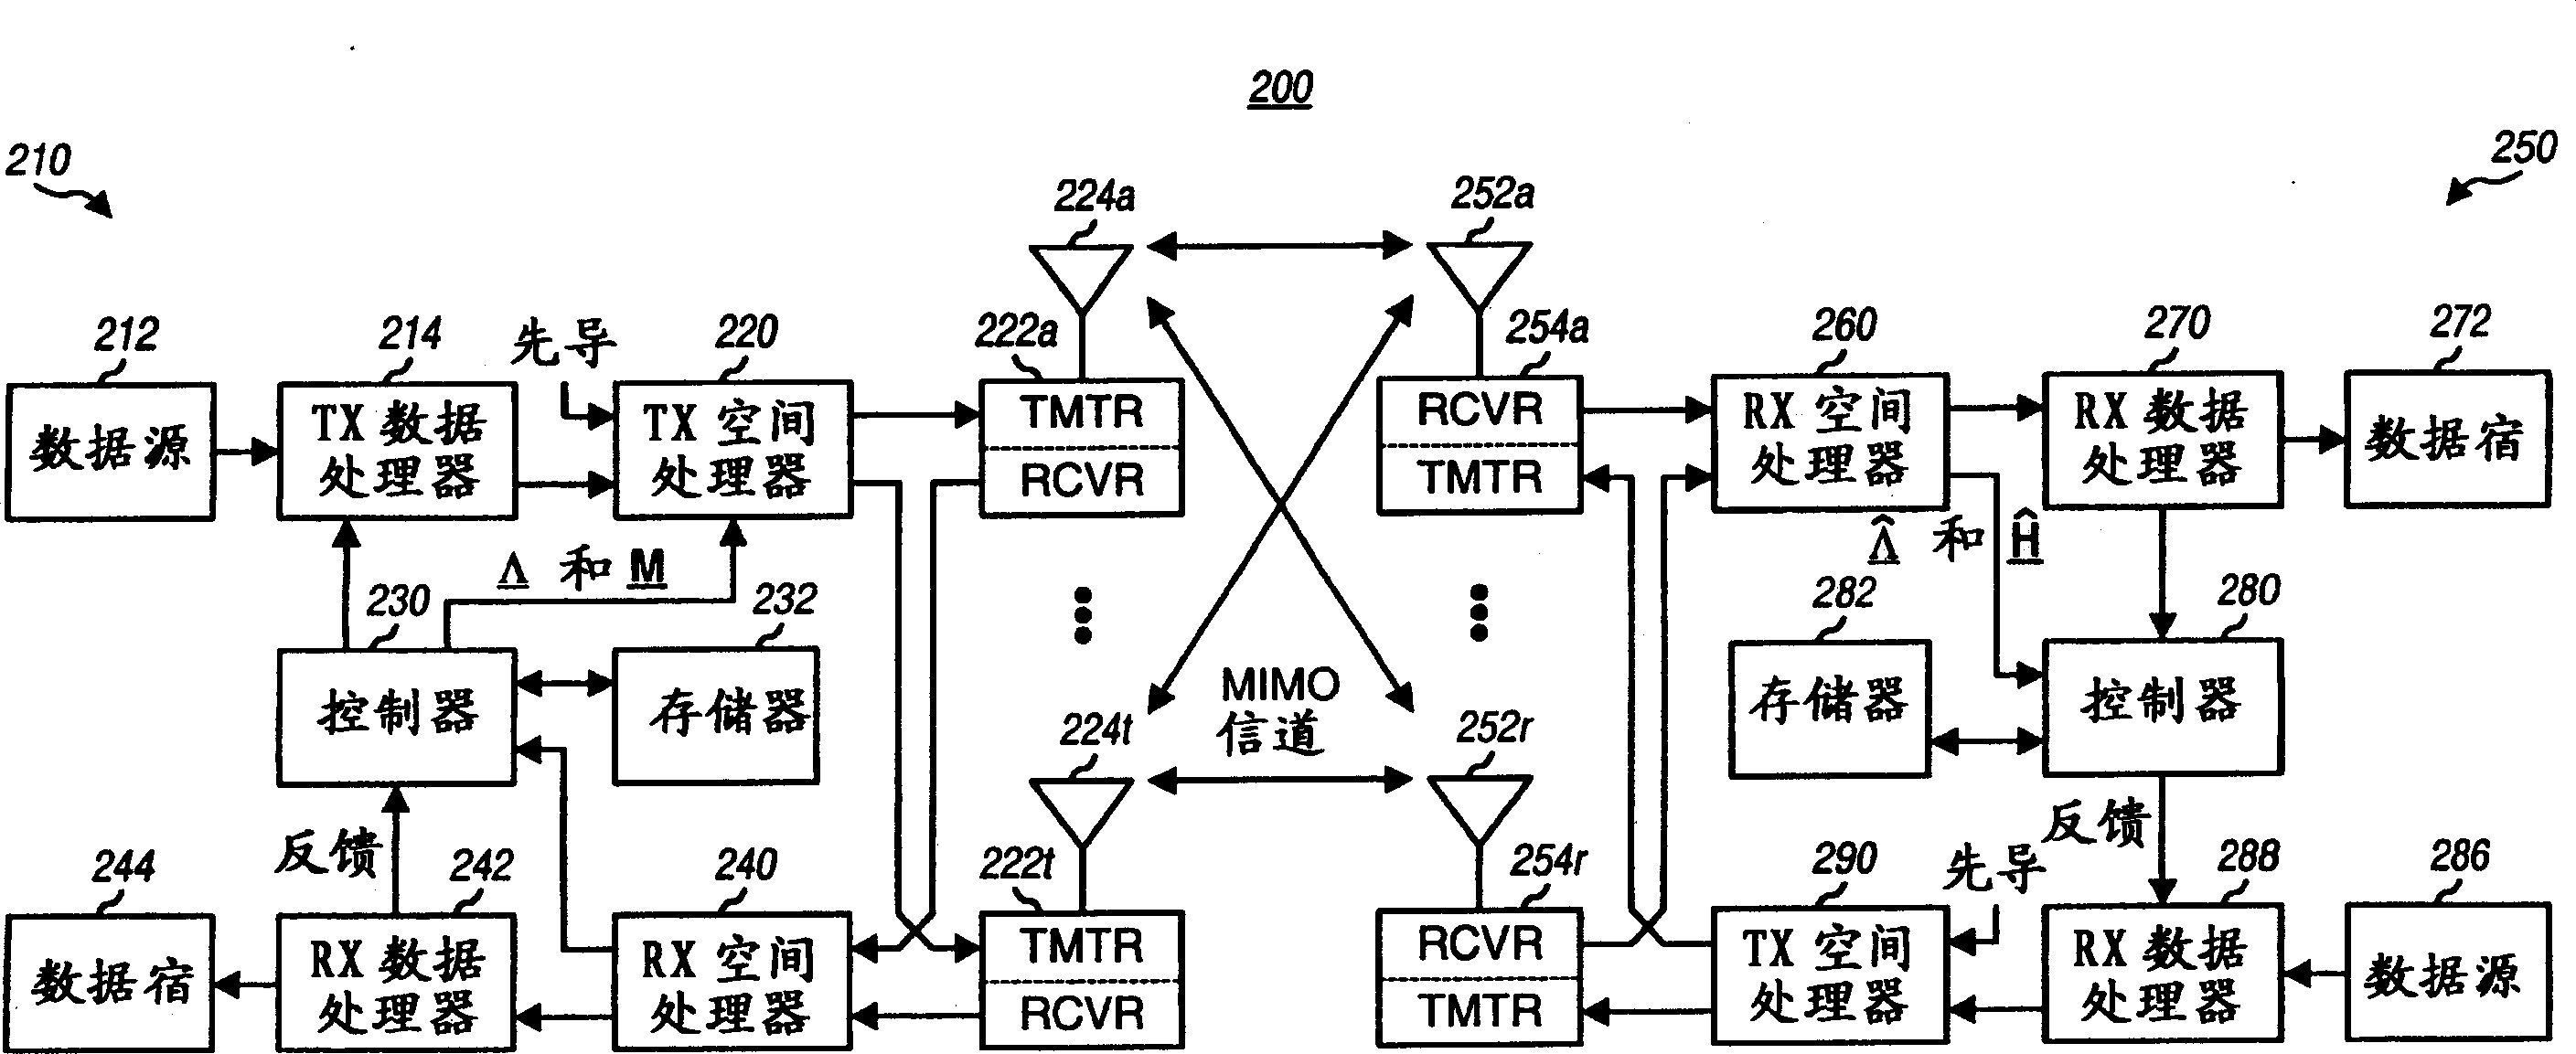 Transmission scheme for multi-carrier MIMO systems